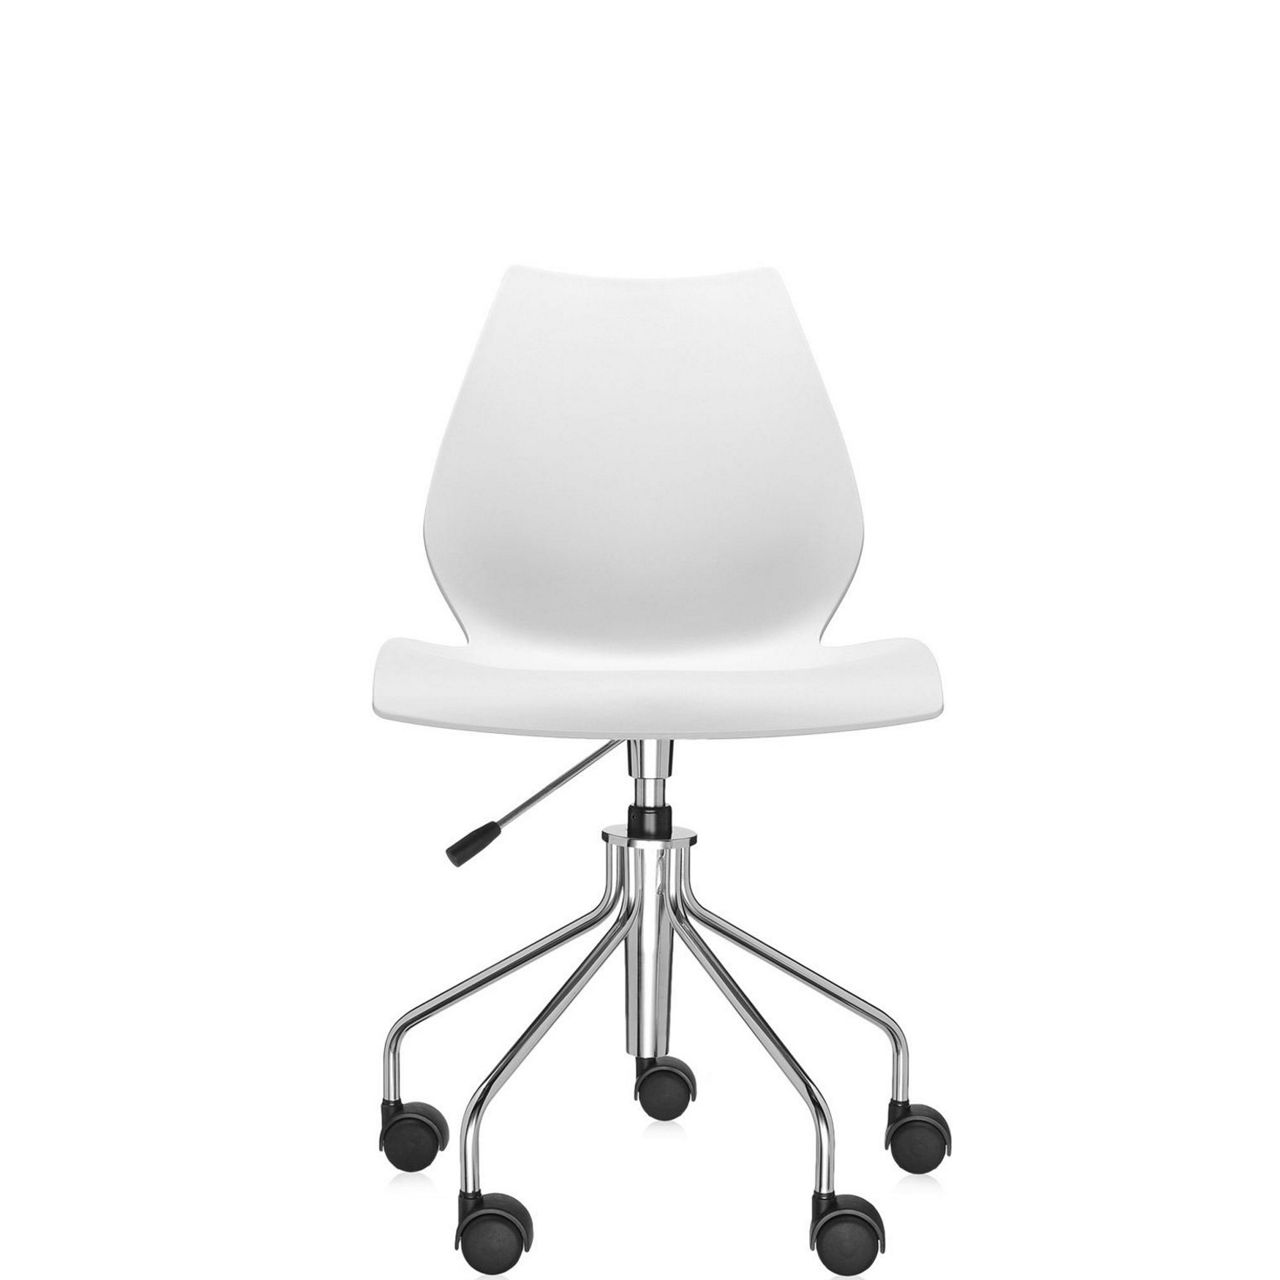 Office Chairs Up to 70% OFF